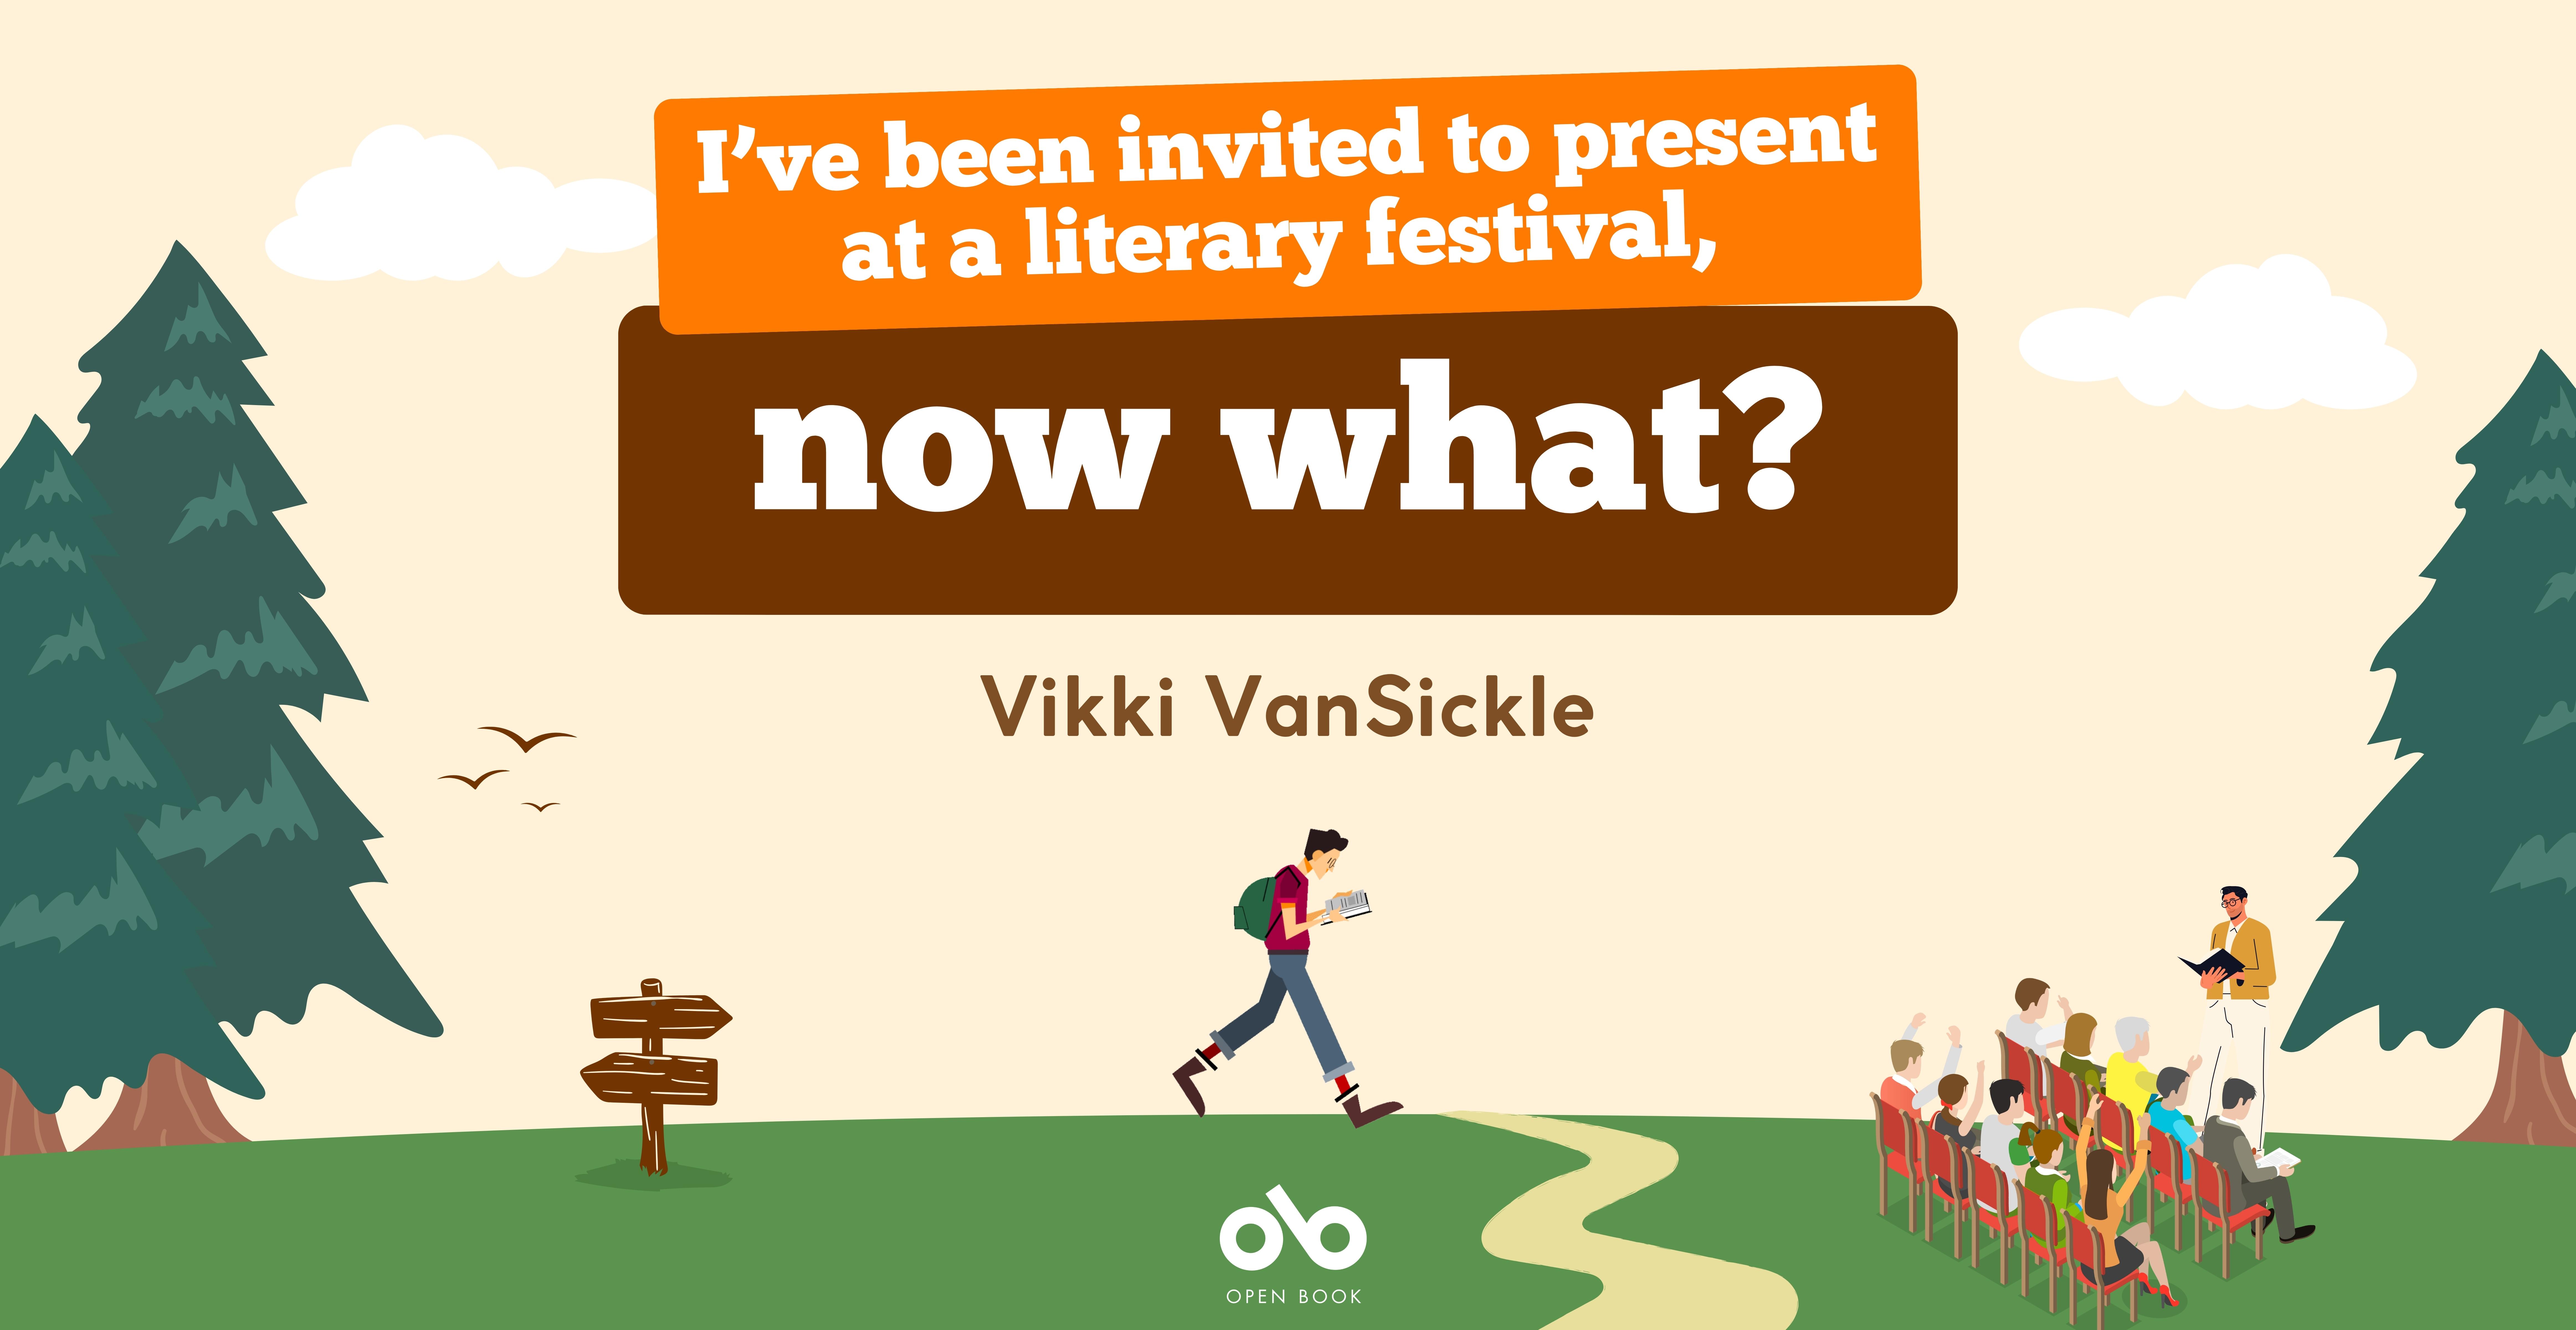 I’ve been invited to present at a literary festival, now what? - Vikki VanSickle